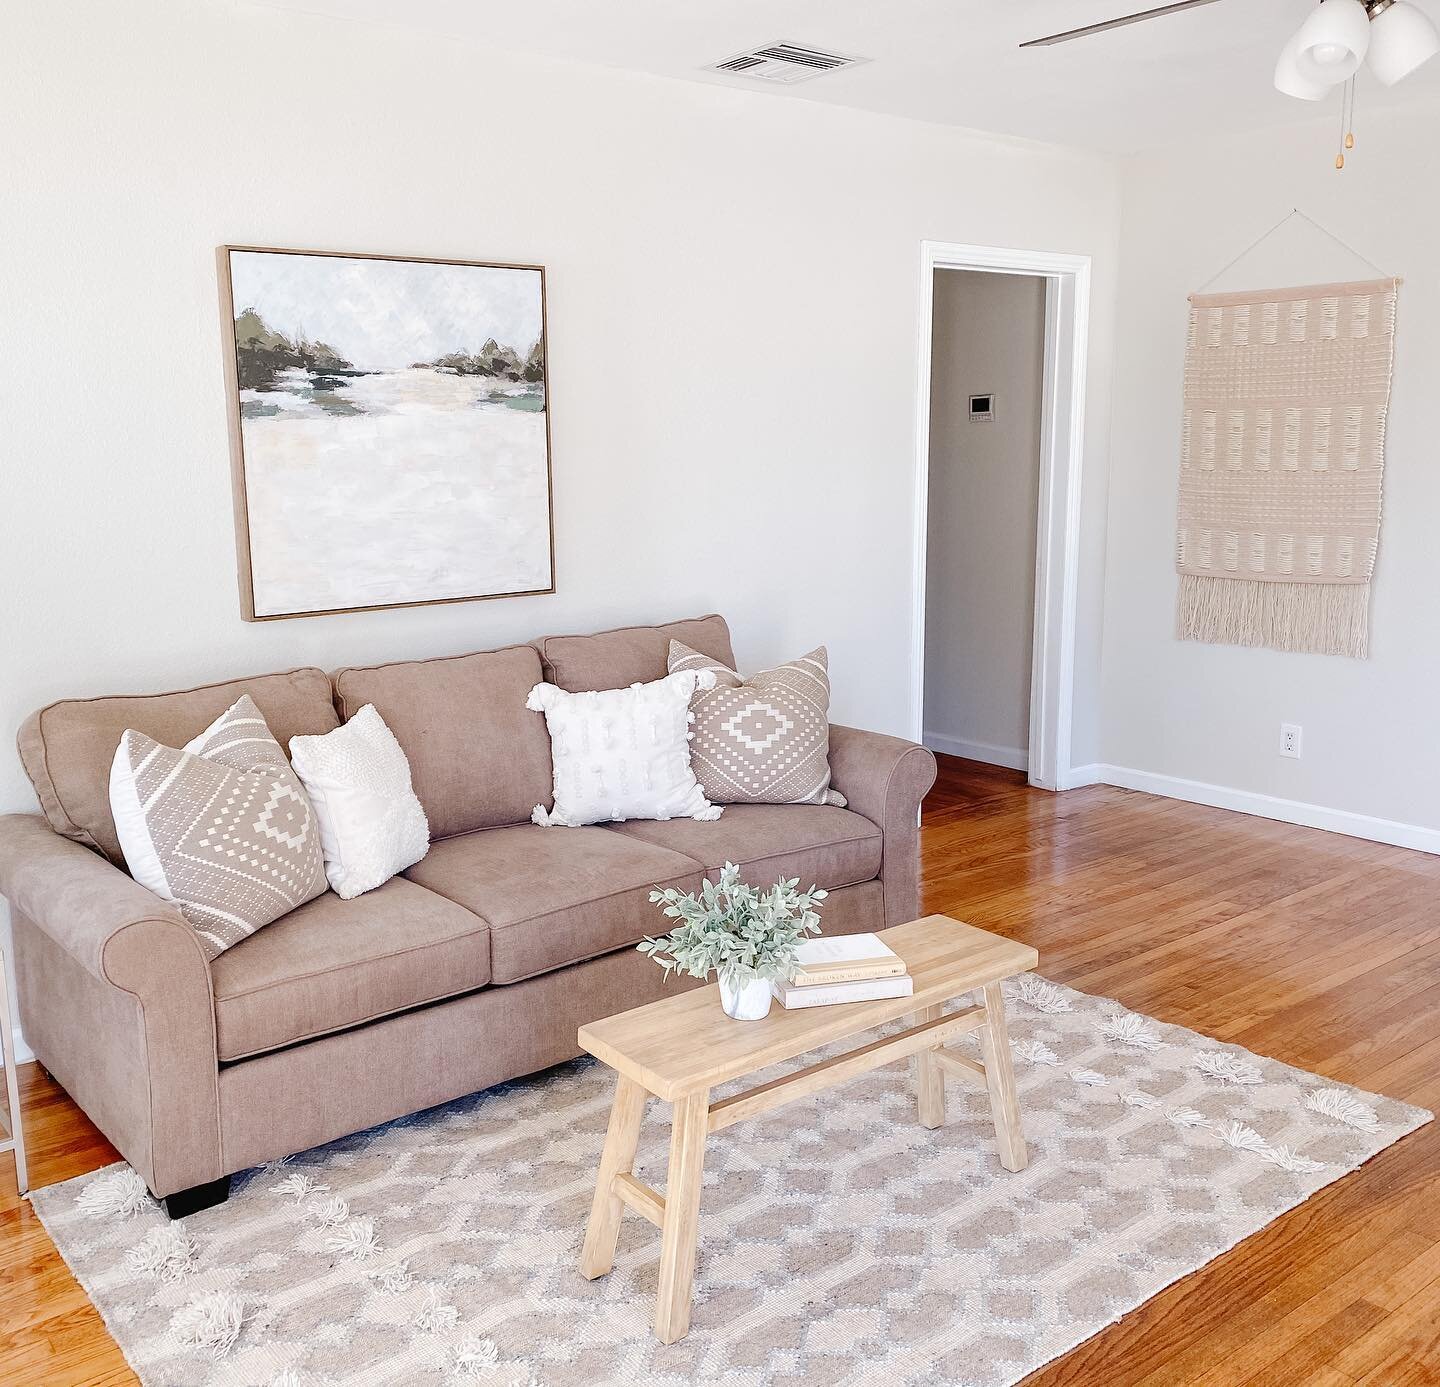 Staged this cute 2 bedroom home in Chino. Perfect starter home! @vanessaoneillrealtor #stagingsells #staginghomes #homestagingworks #homestagingtips #stagingworks